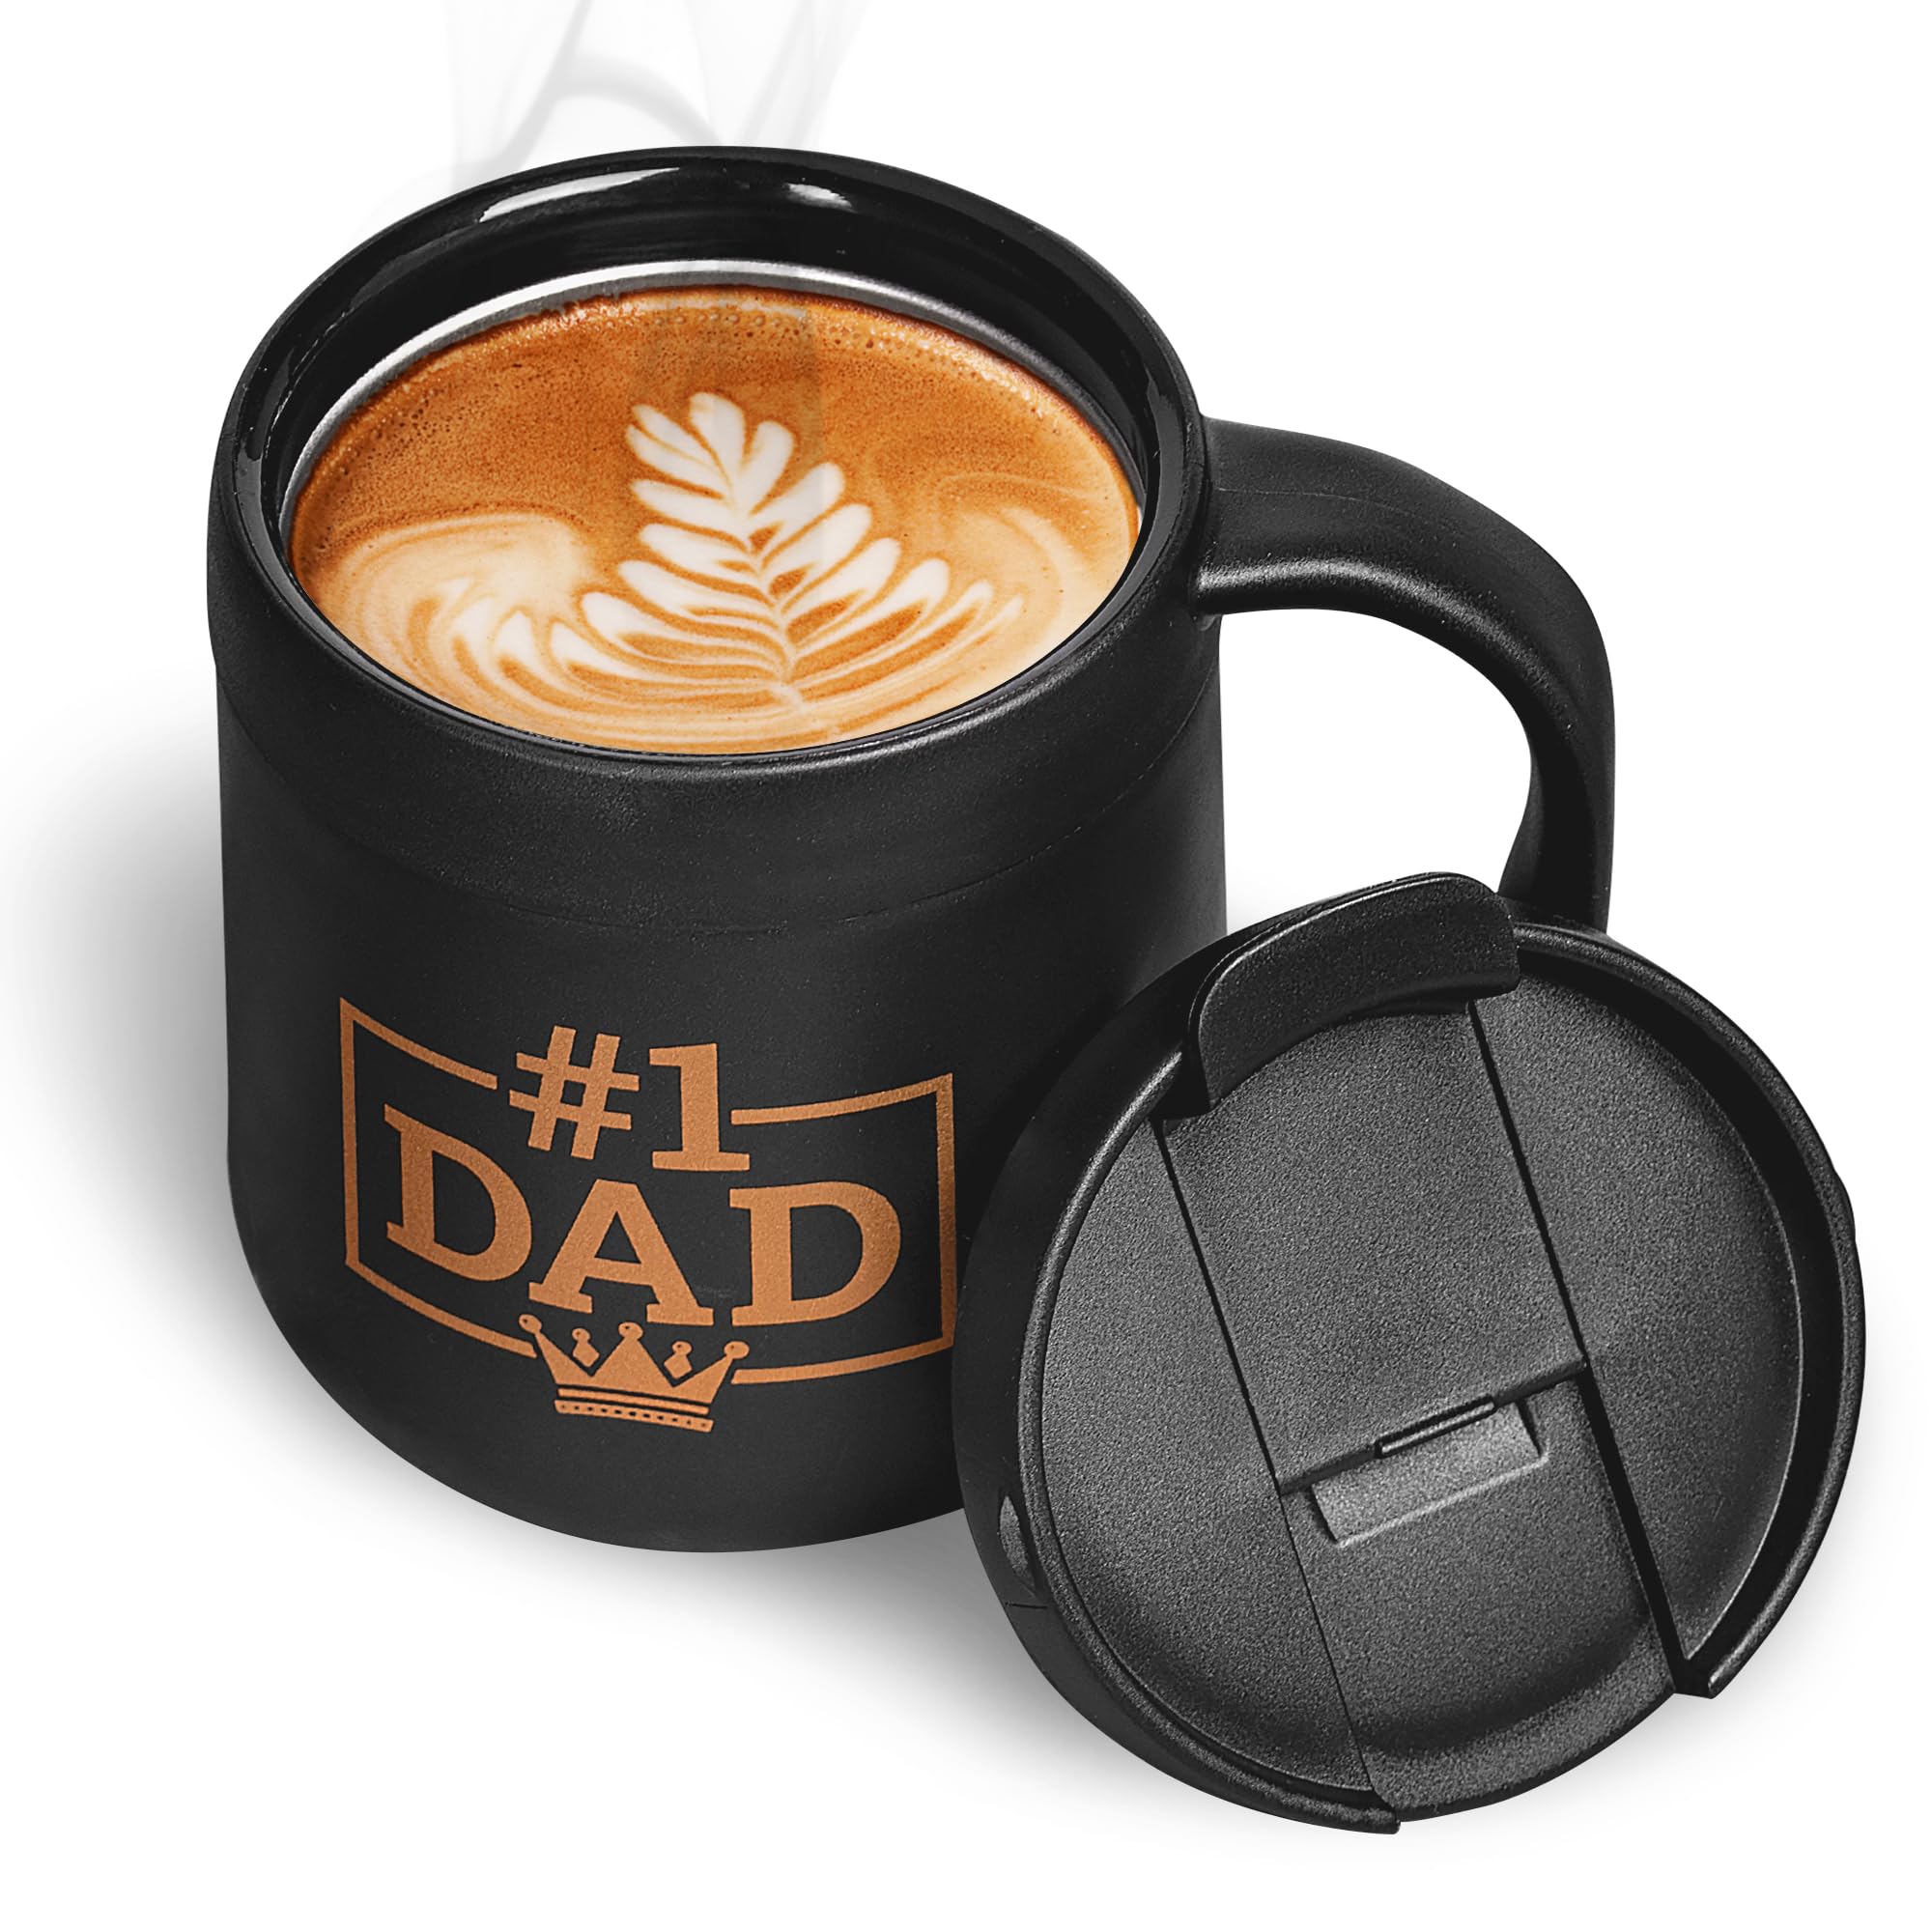 Durossi #1 Dad Coffee Mug with Handle & Lid - Worlds Best Father, Grandpa, Husband, Brother & Friend Gift for Valentines day & Birthday - Travel Gifts Ideas Cup Daughter Son - BPA Free